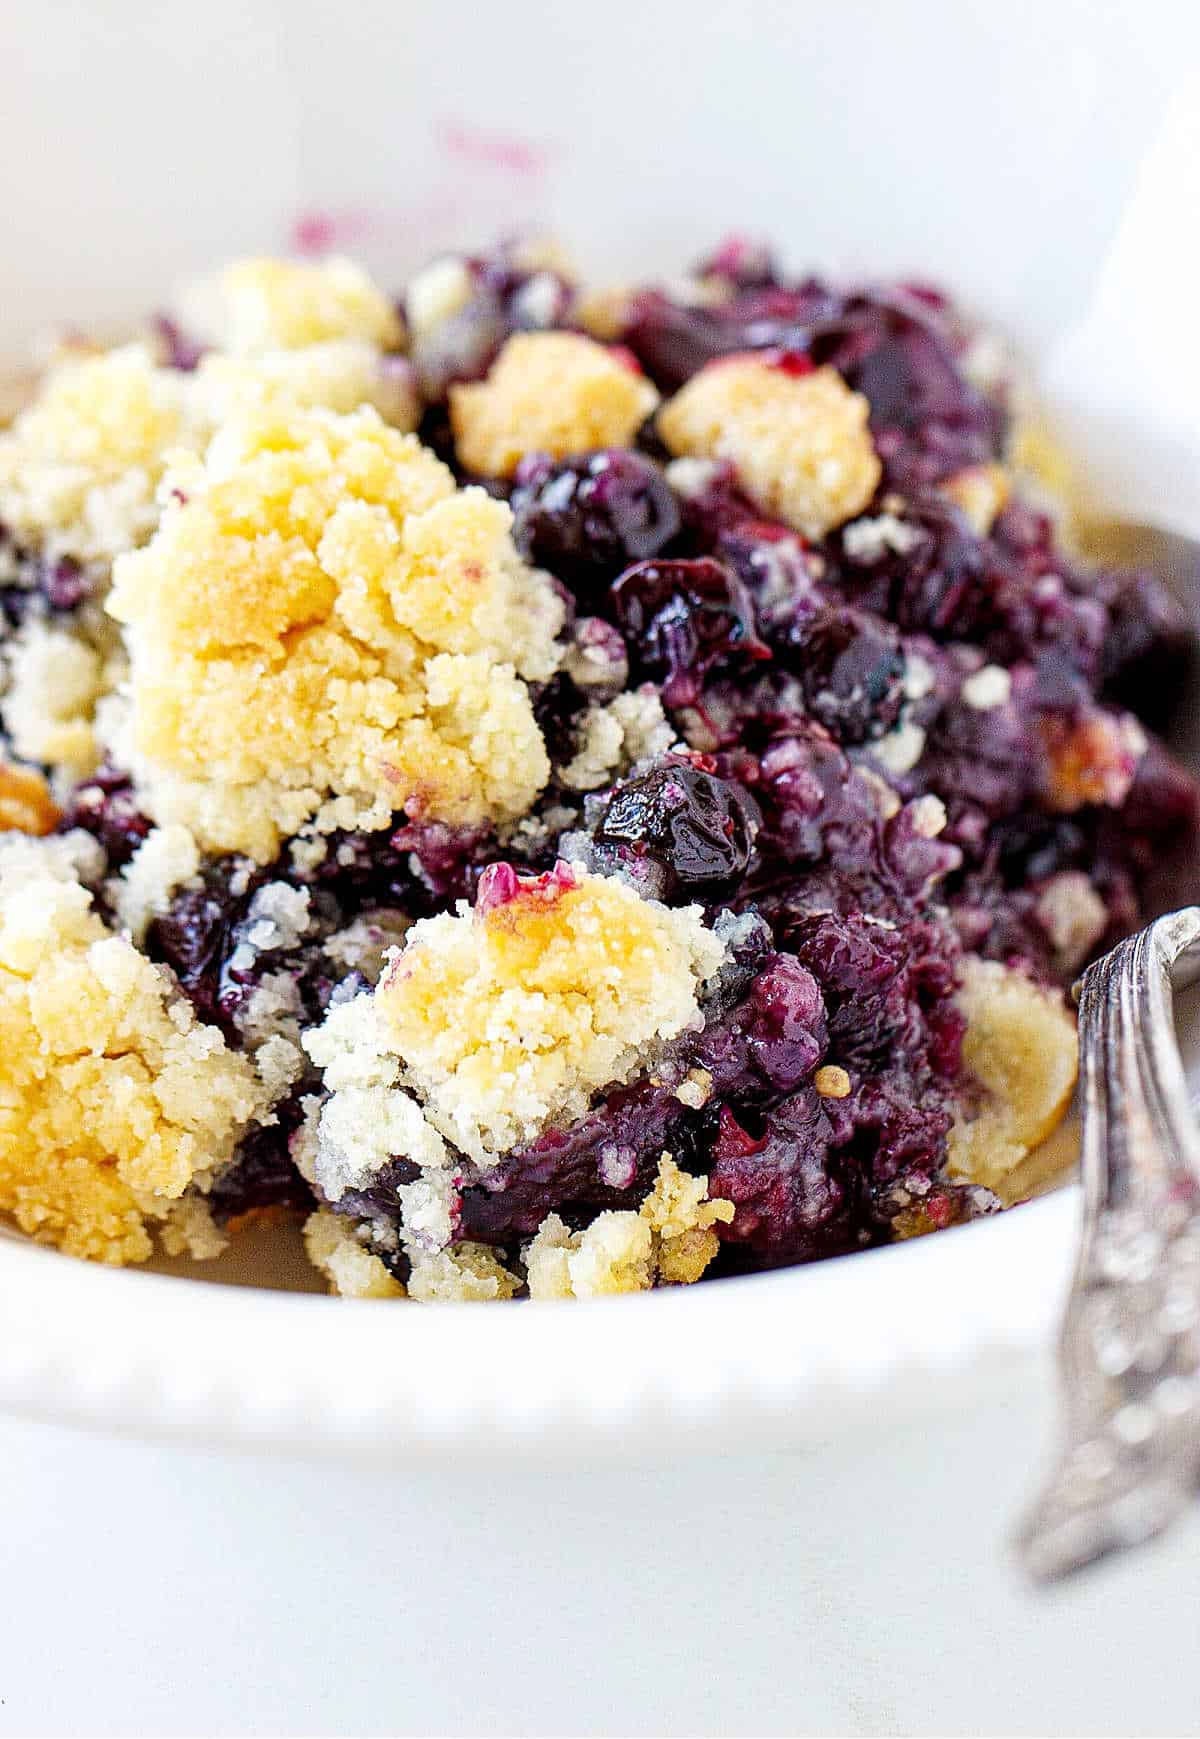 Crumbly blueberry dump cake serving in a white bowl with a silver spoon.